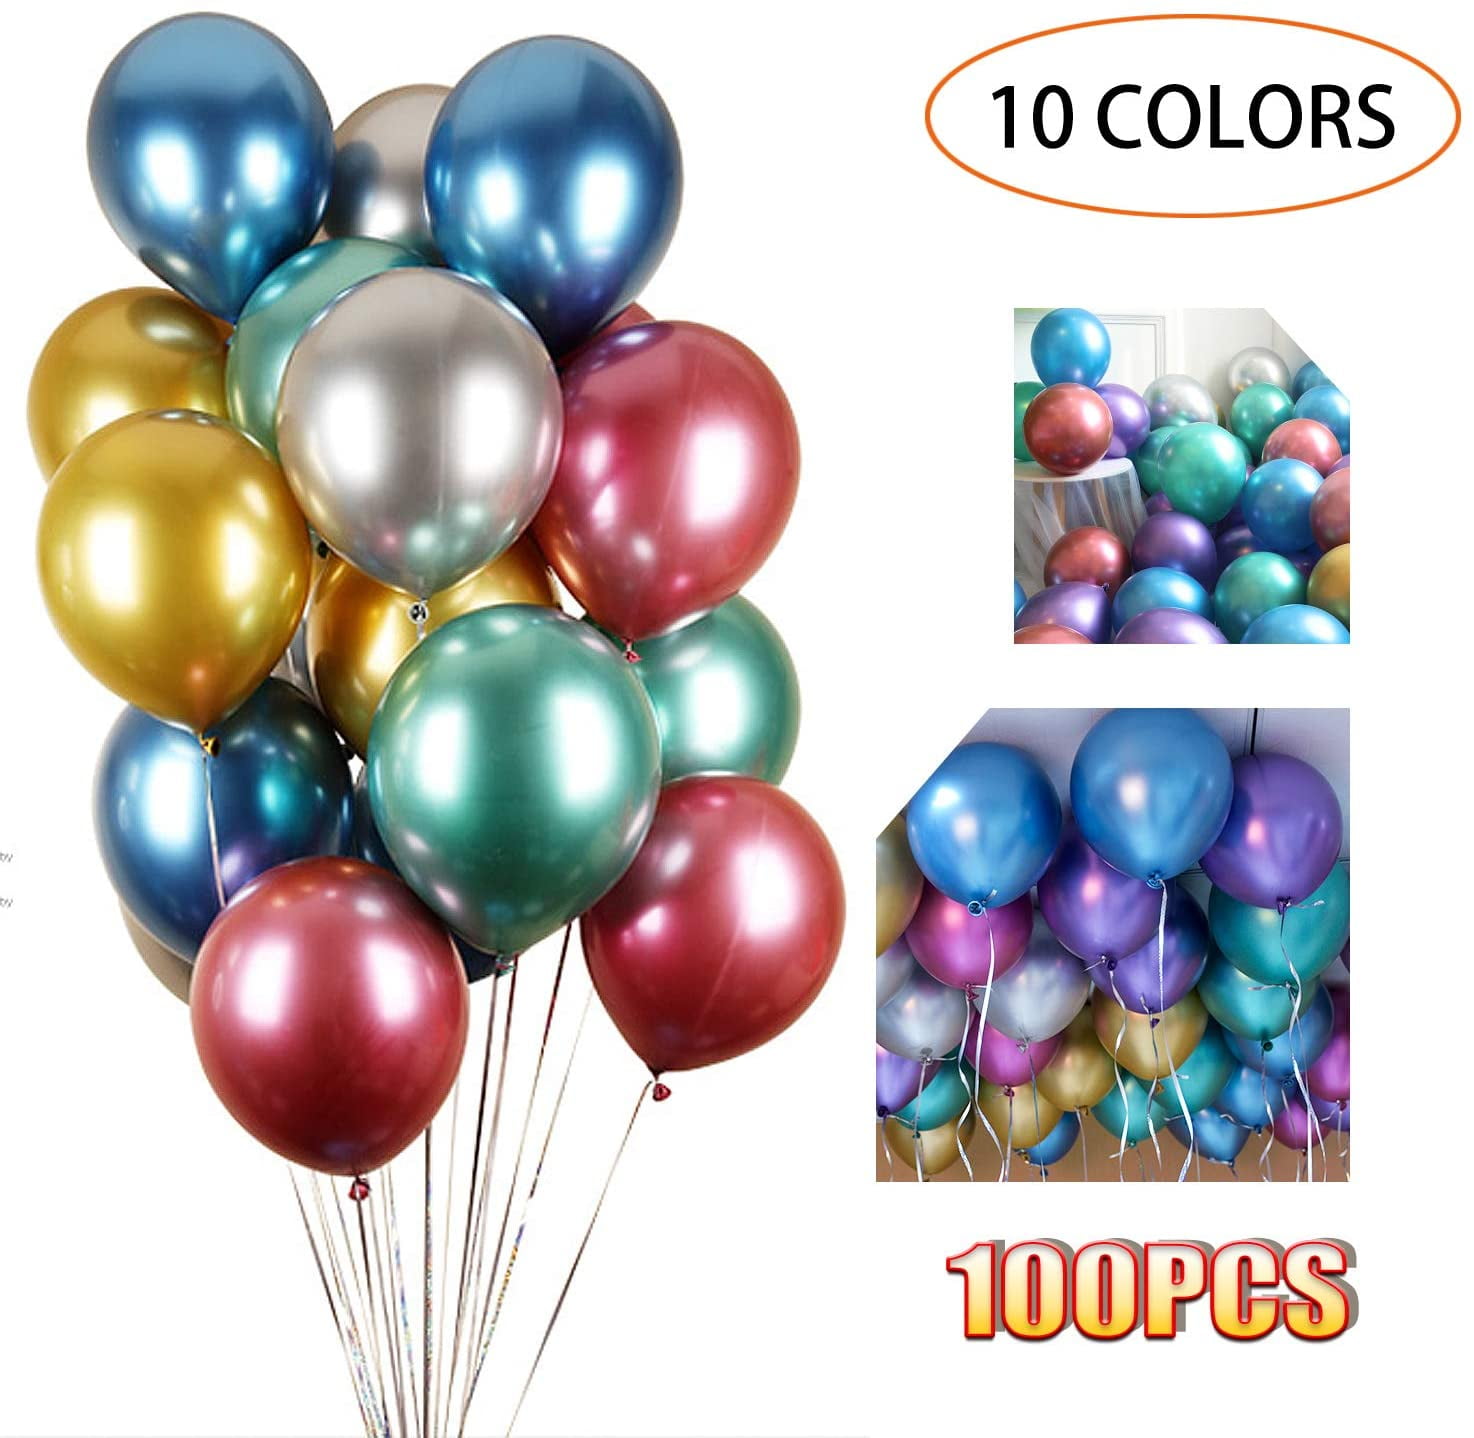 100 PCS 12 Inches Black Latex Balloons Large Thick Big Round Biodegradable Bulk Helium Gas or Air Inflated for Kids Birthday Graduation Wedding Party Halloween Christmas Decorations Supplies Favors